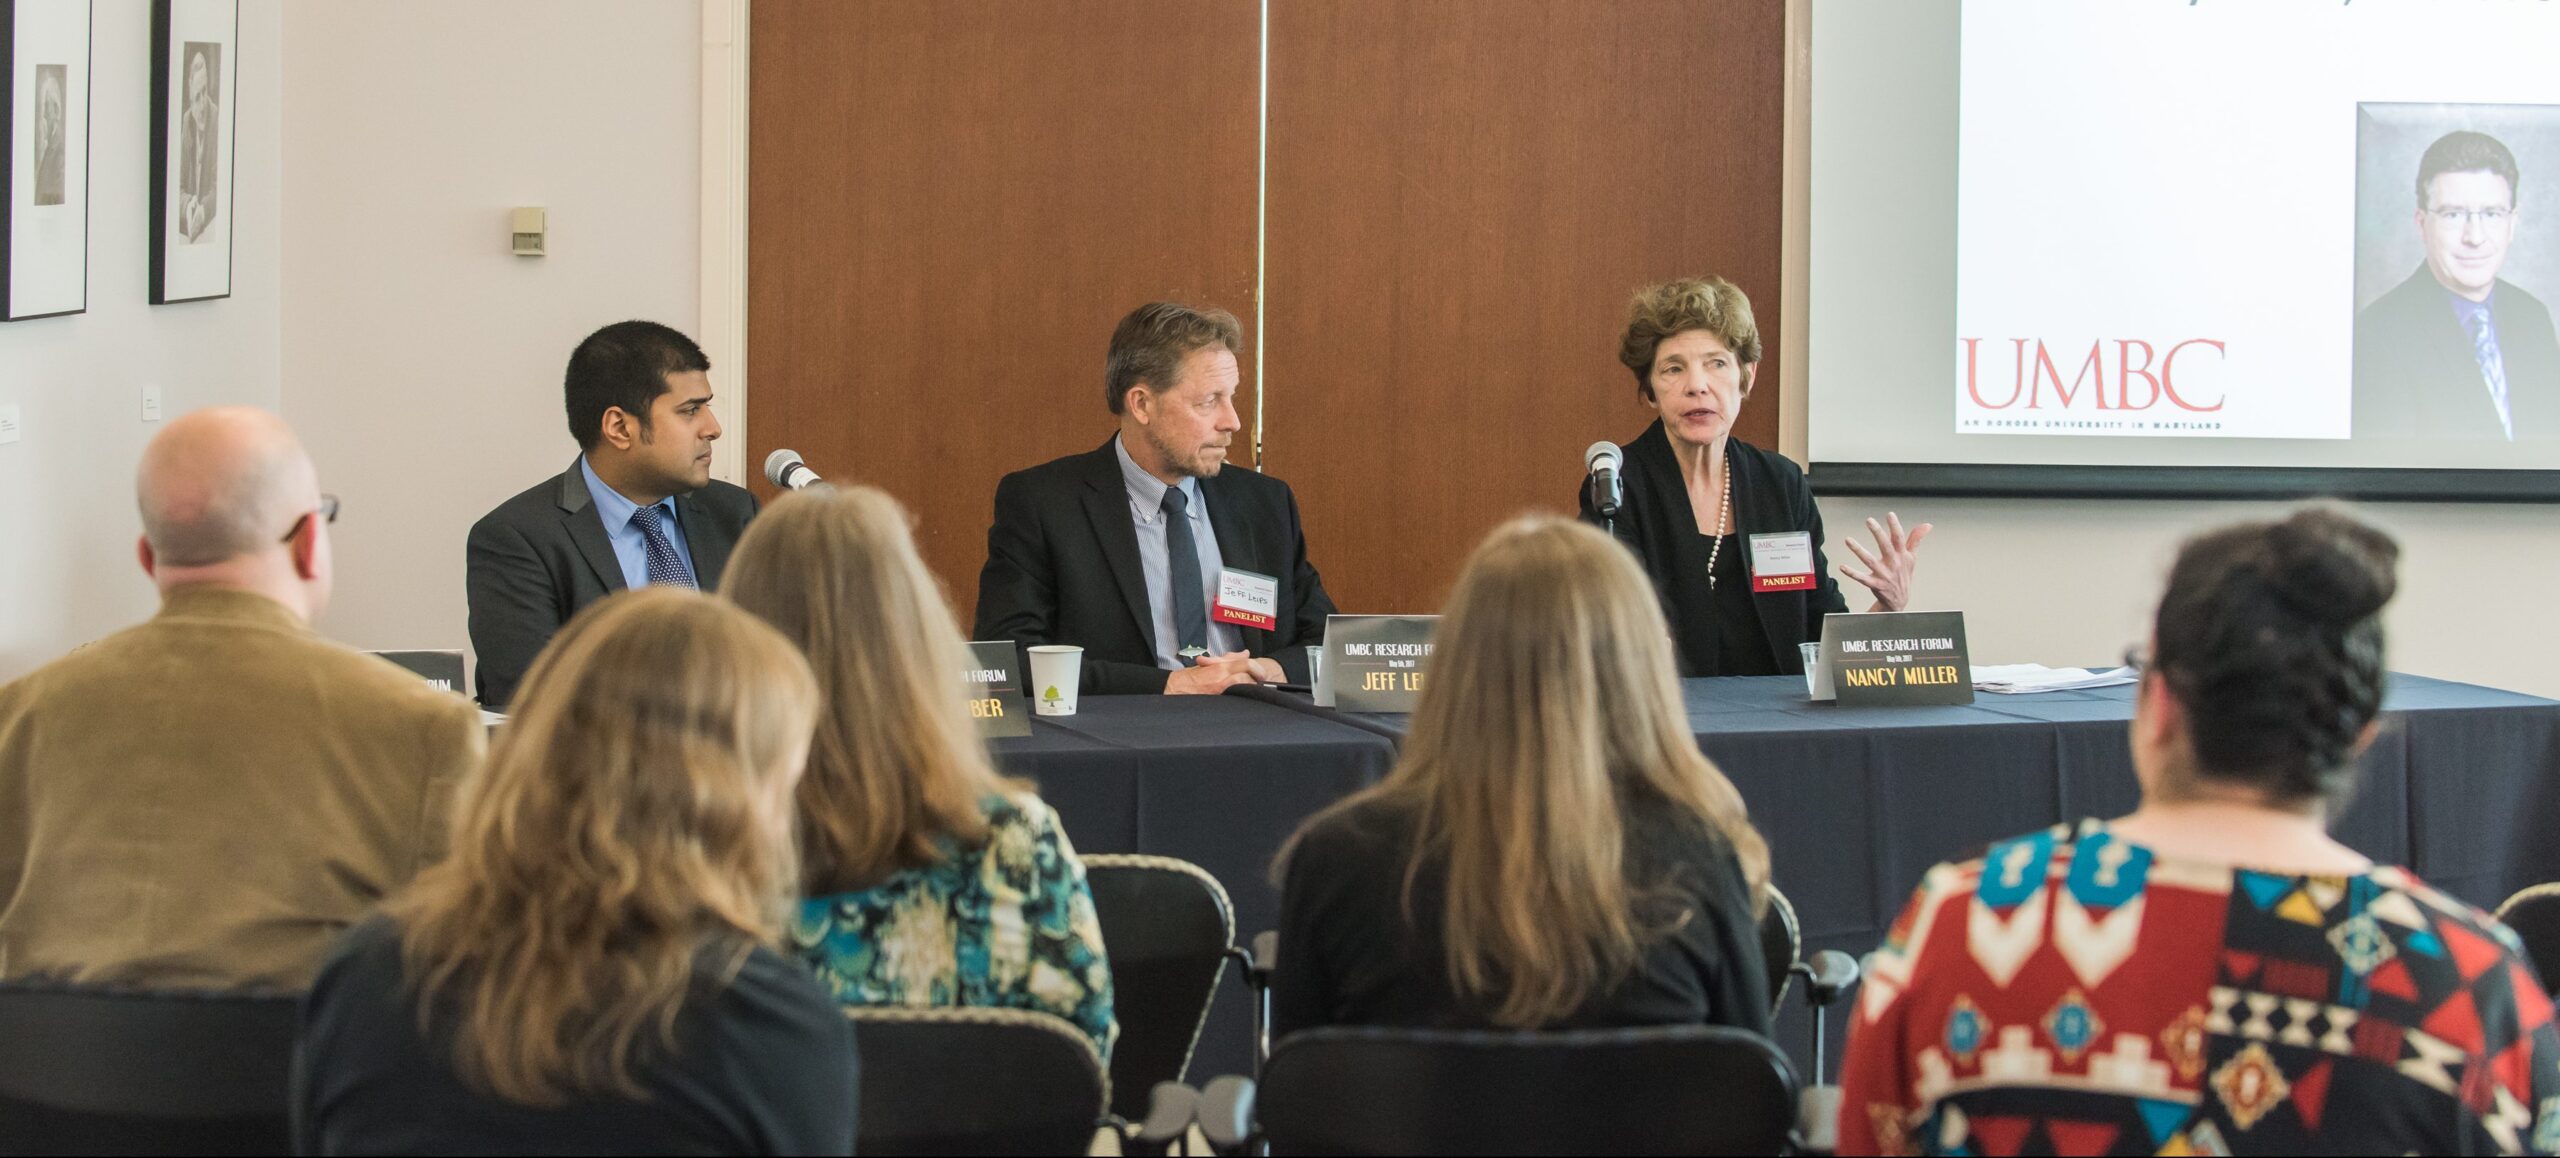 UMBC forum highlights need for interdisciplinary collaboration in aging research